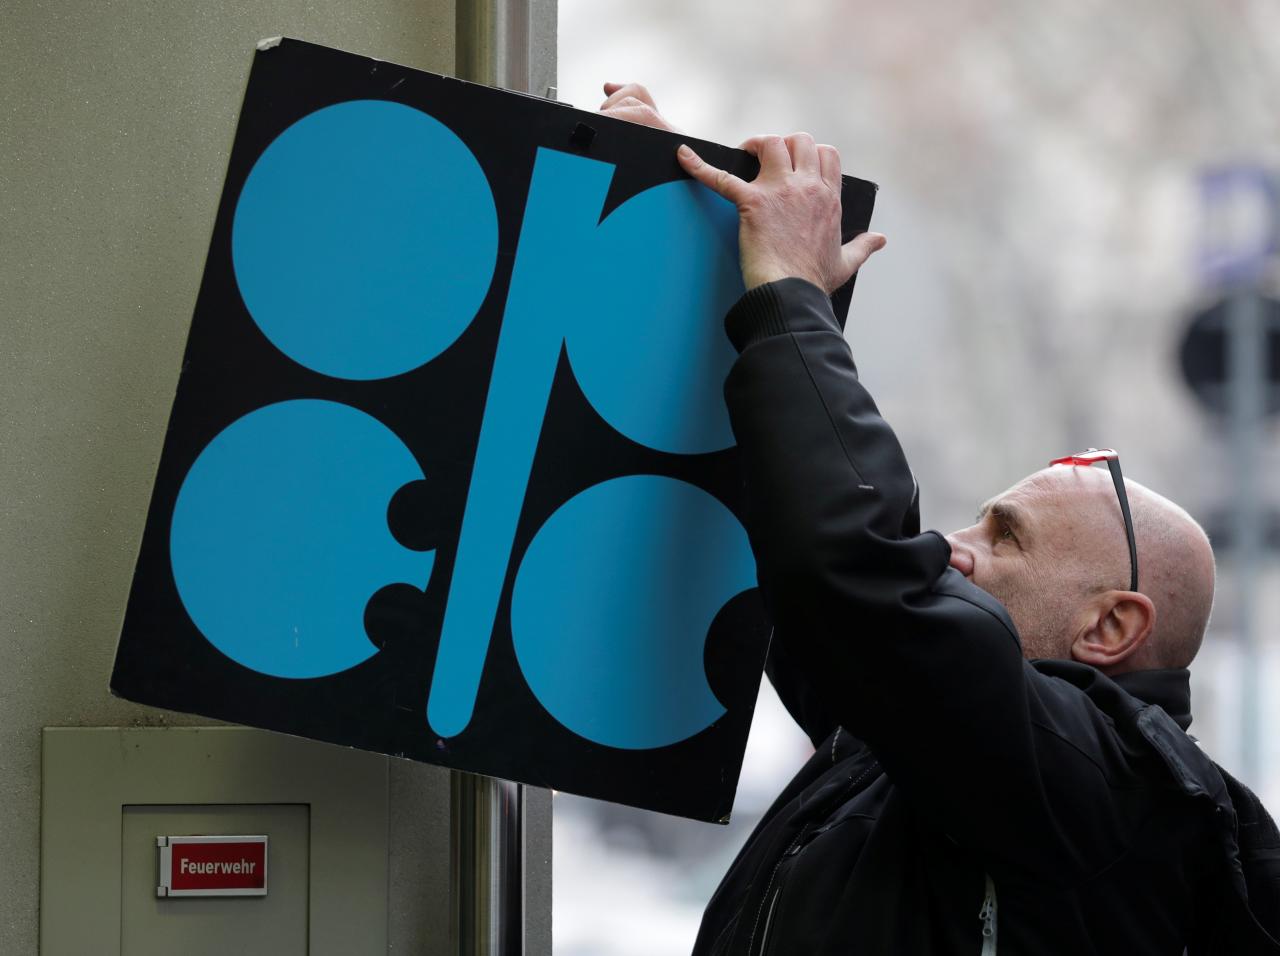 OPEC, allies set to agree oil cut extension to end of 2018